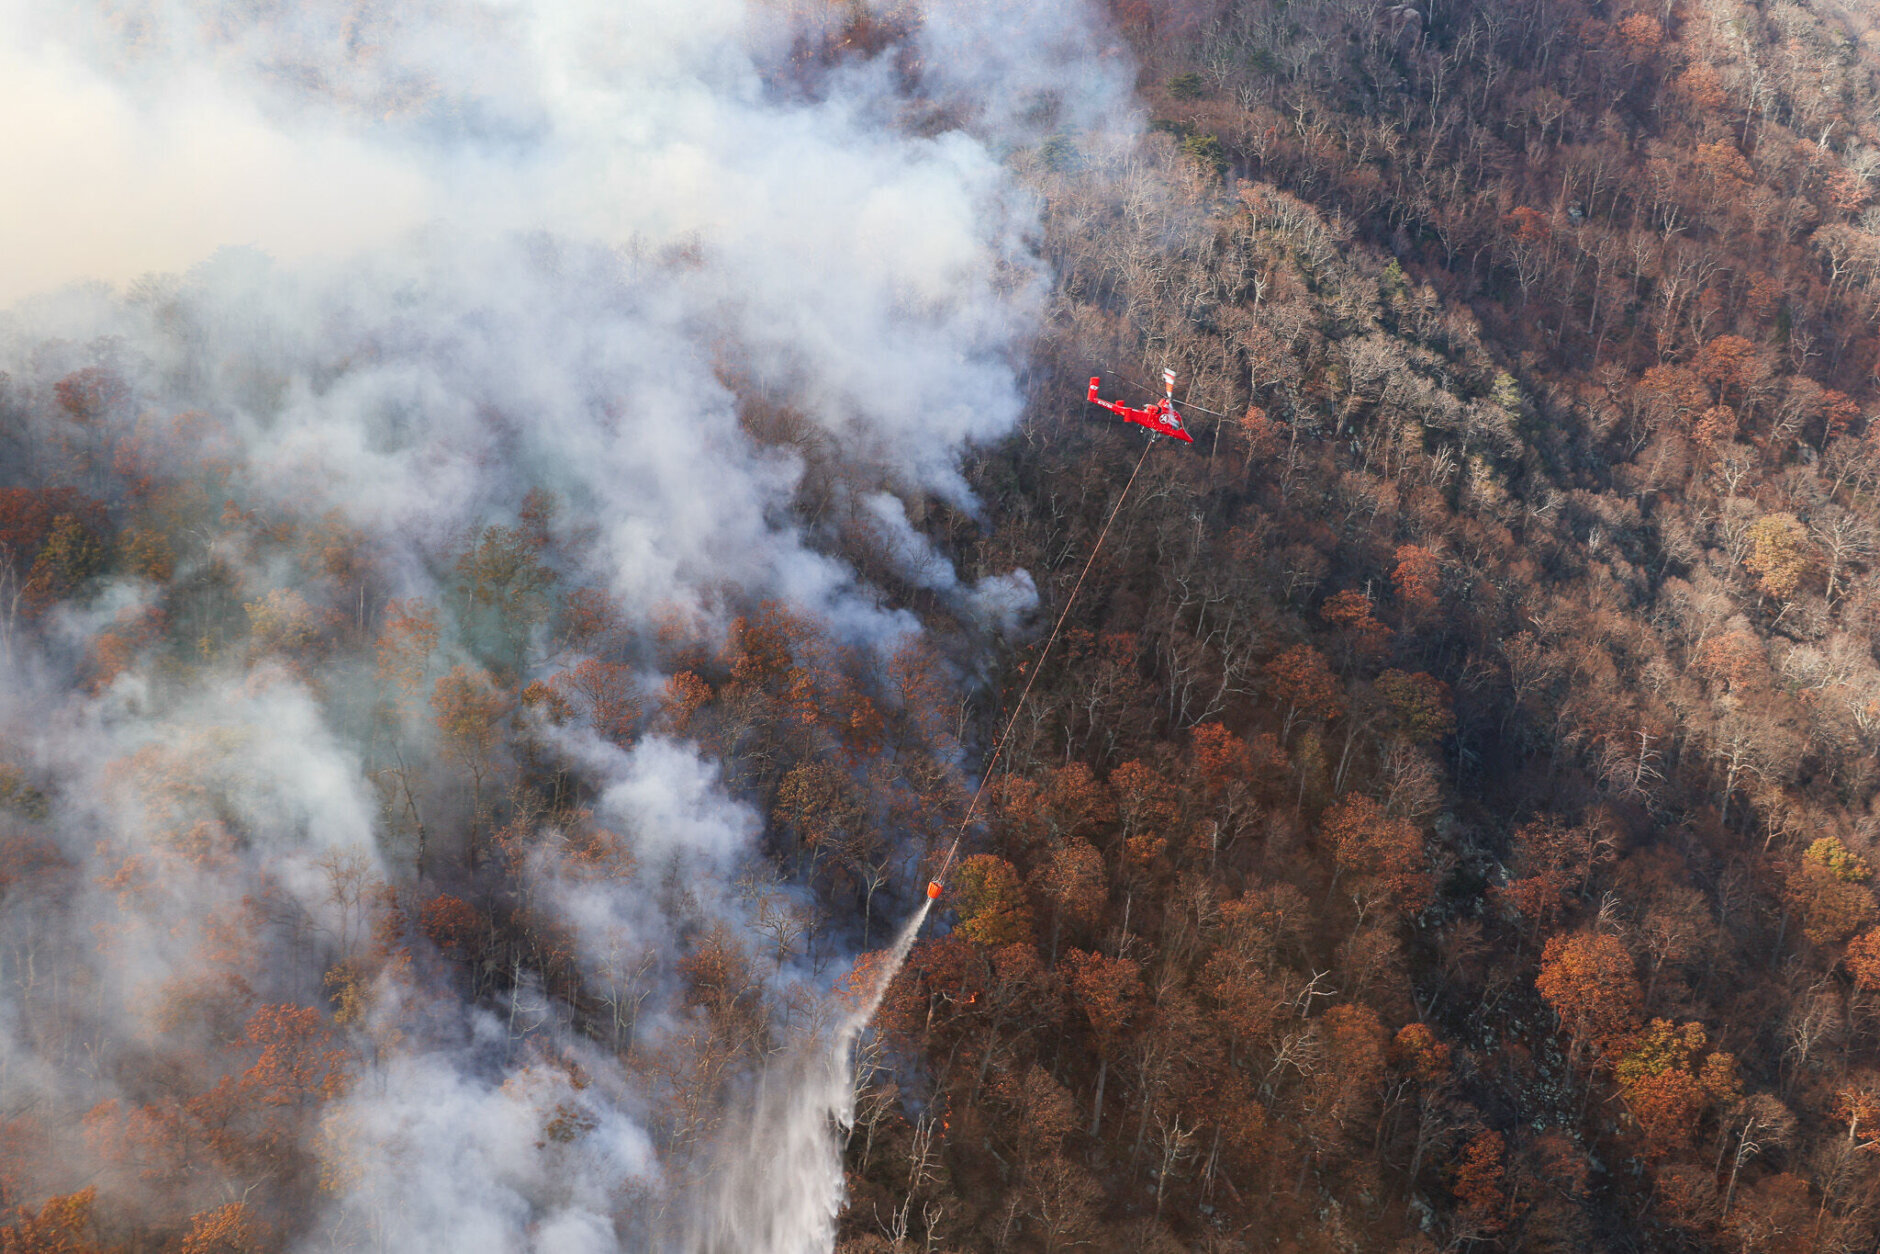 helicopter dropping water over forest fire in virginia